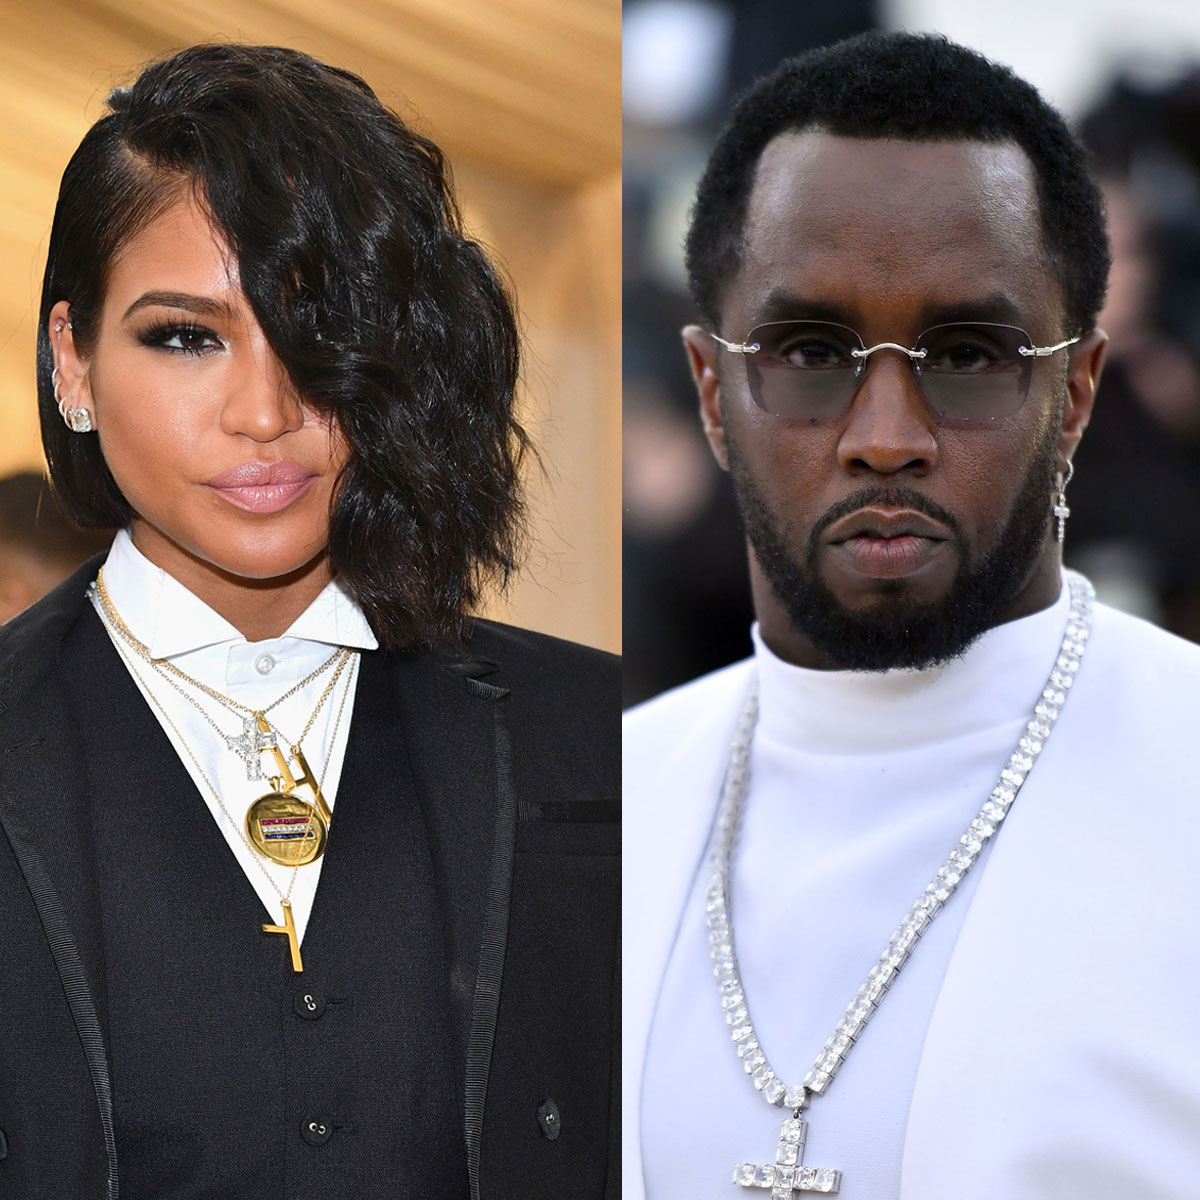 Authorities Address Video Appearing to Show Diddy Assaulting Cassie